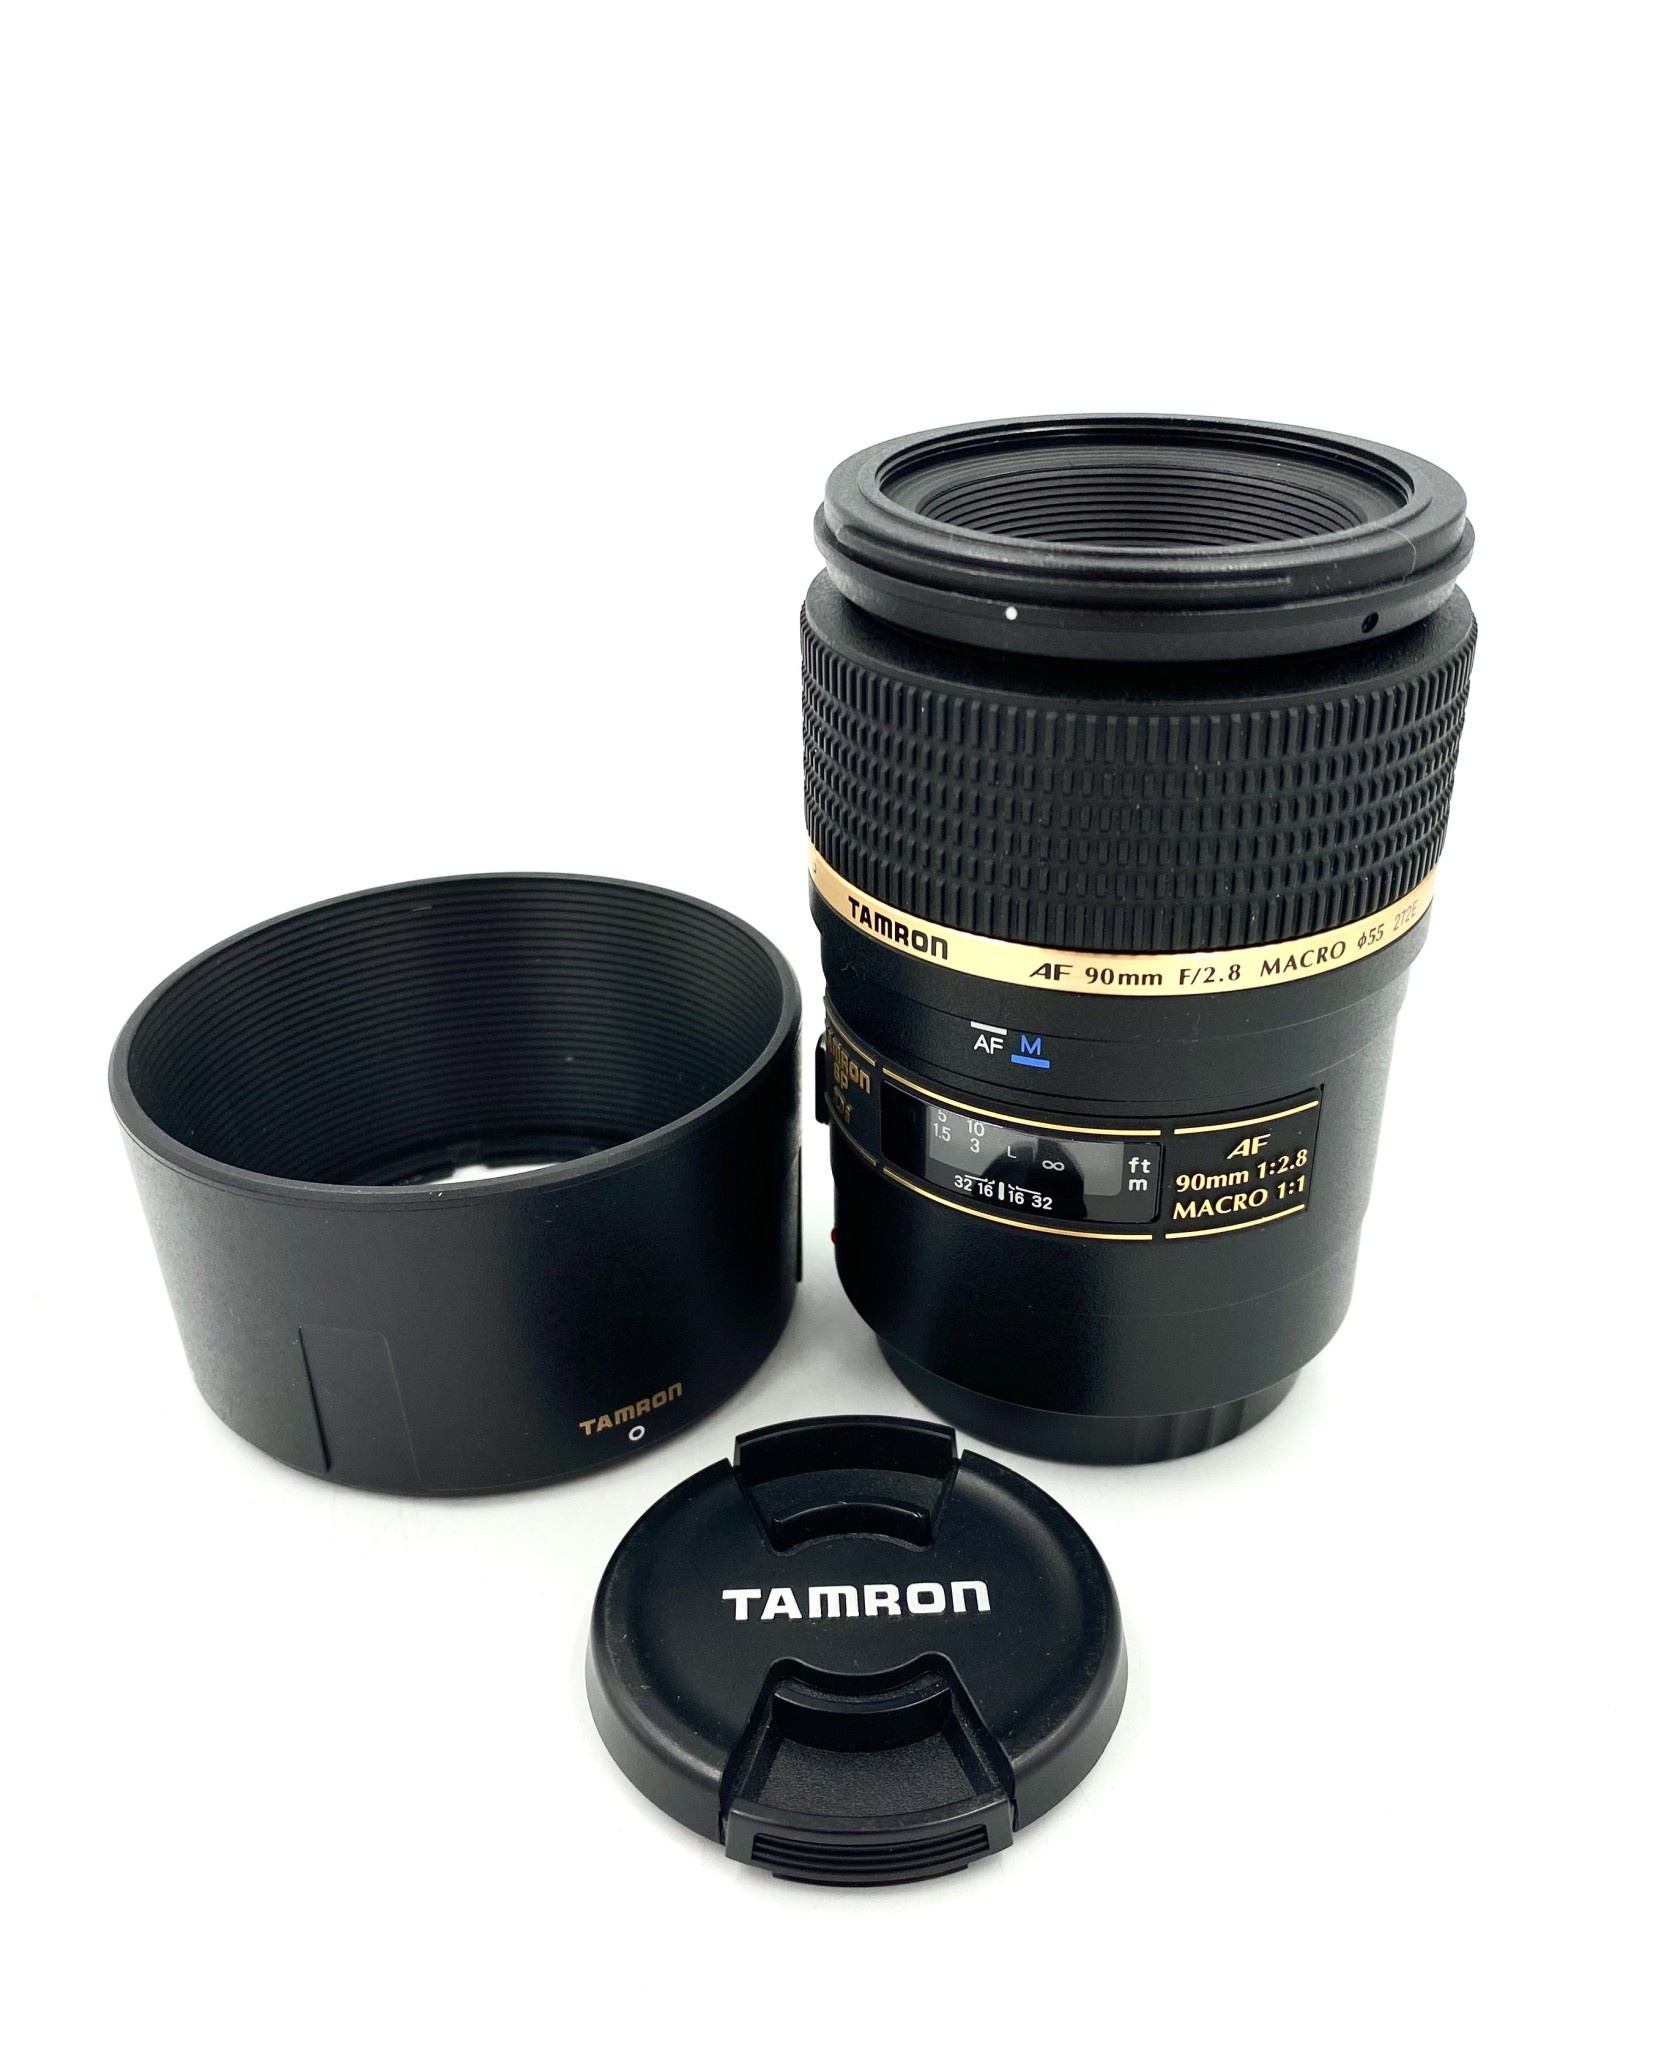 USED Tamron SP AF 90mm f/2.8 Di Macro 1:1 (Canon EFS) - Stewarts Photo